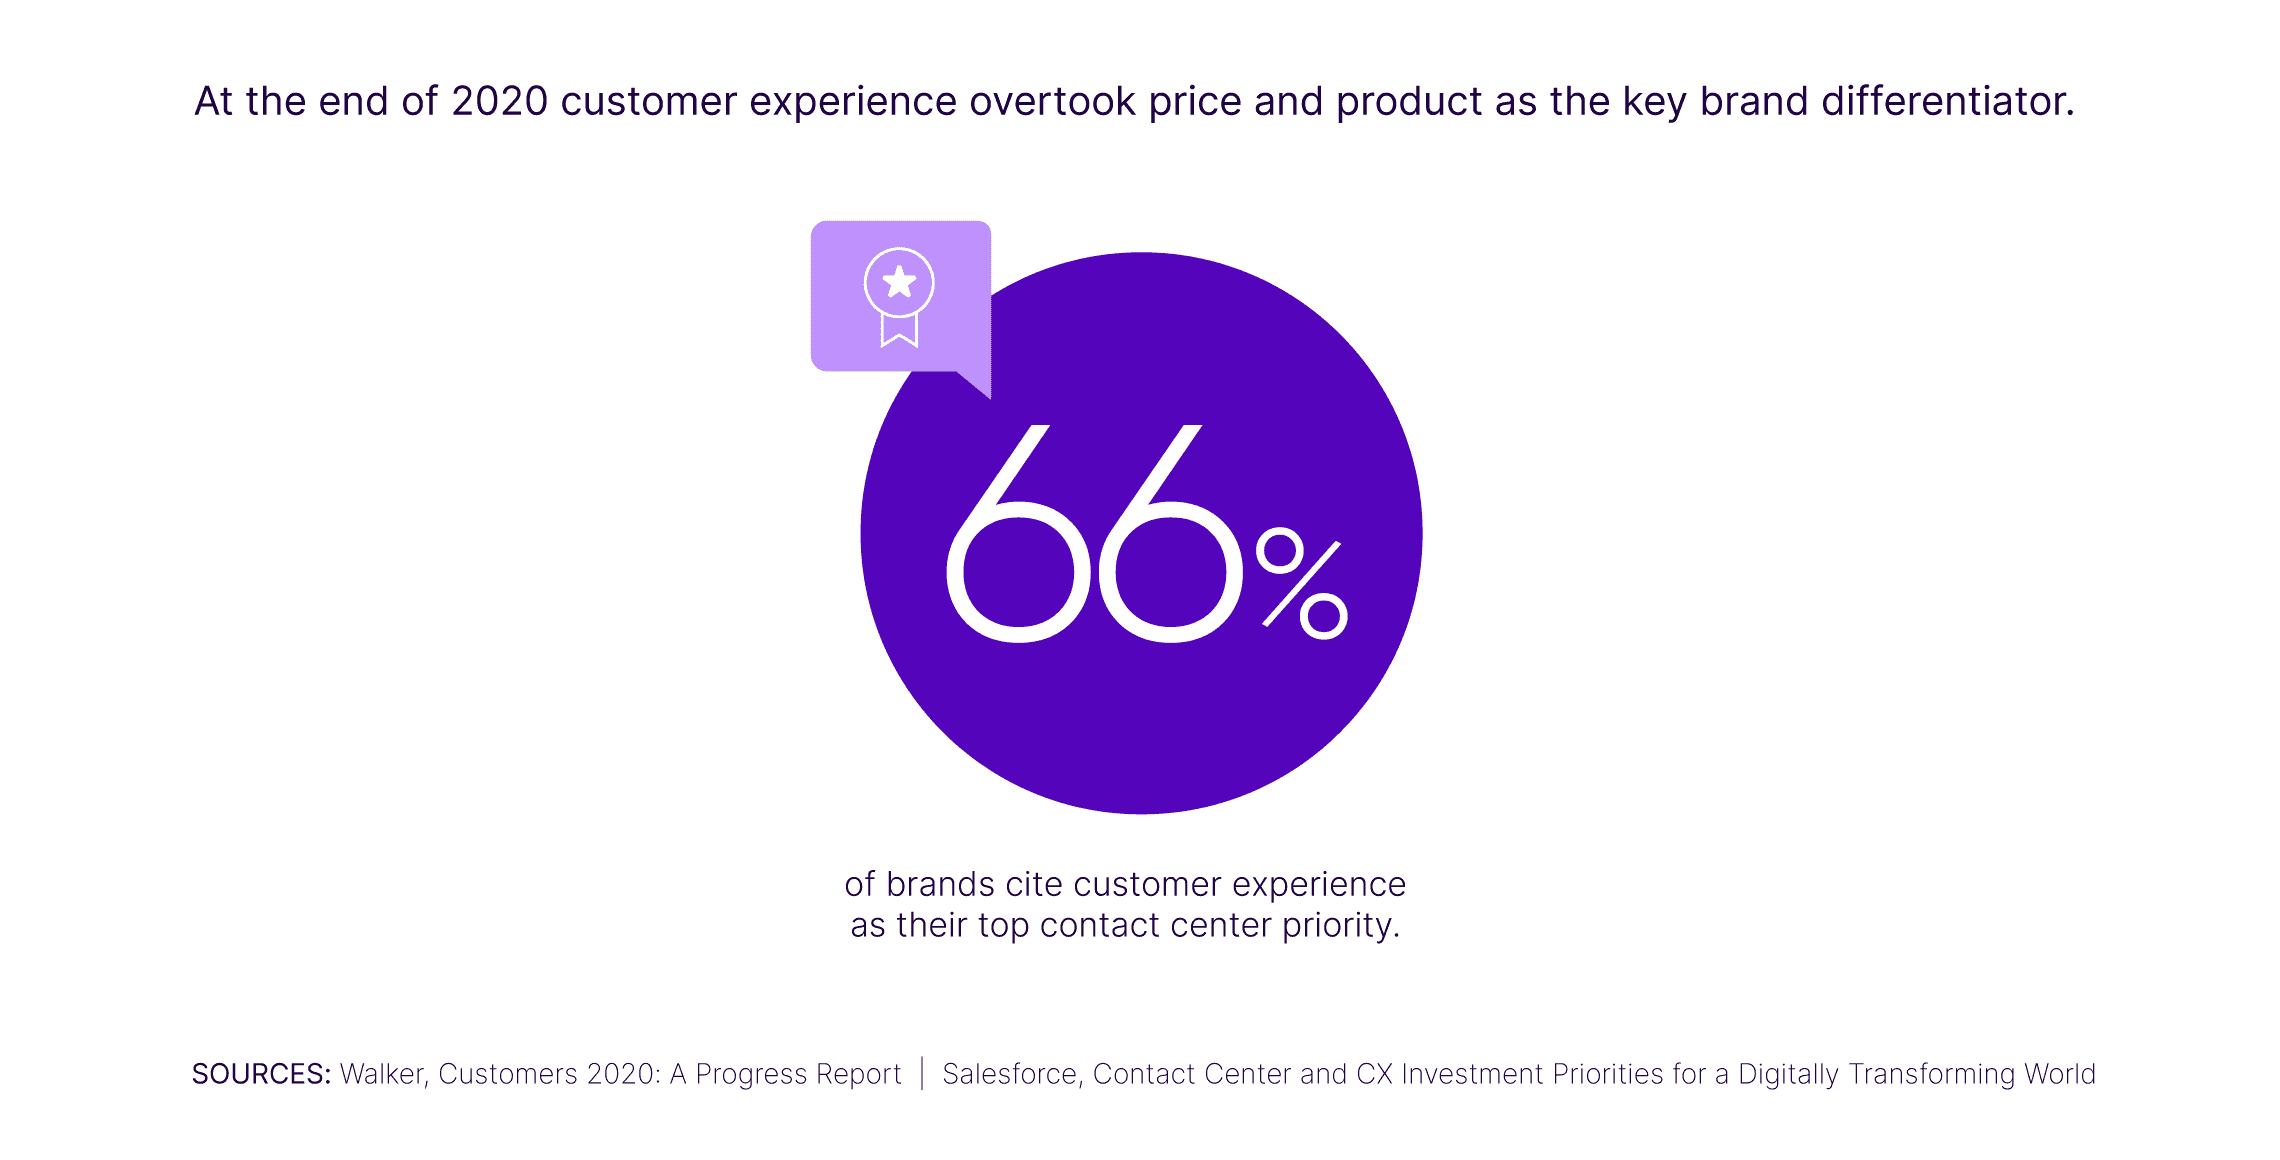 At The End Of 2020 Customer Experience Overtook Price And Product The Key Brand Differentiator